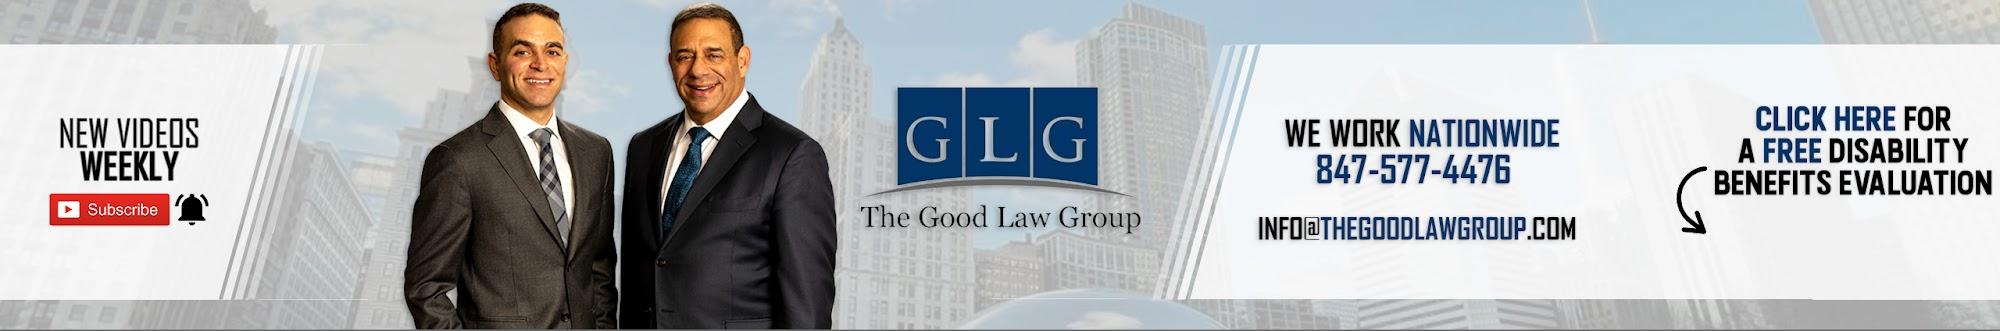 The Good Law Group